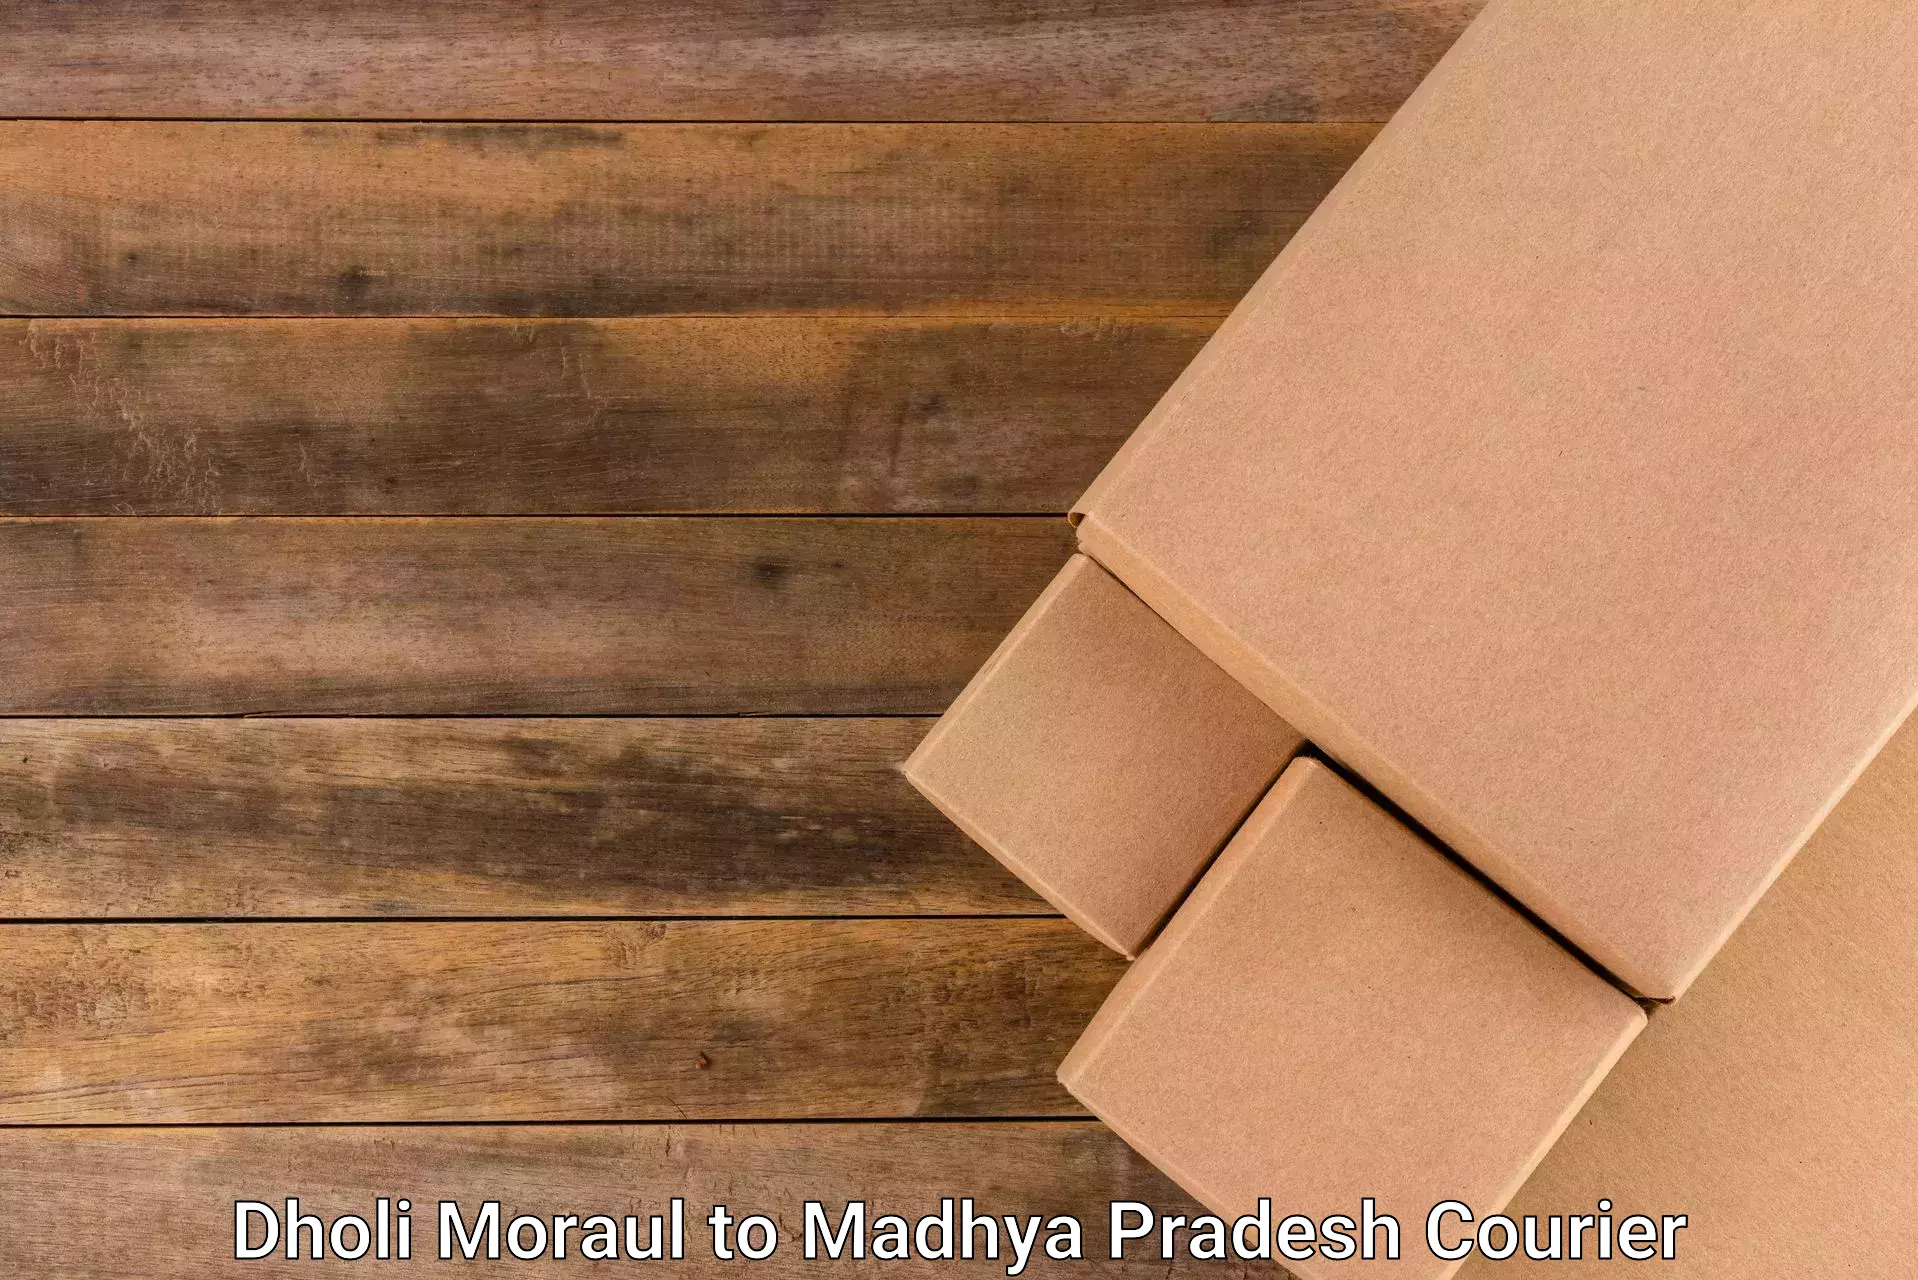 Versatile courier offerings Dholi Moraul to Chand Chaurai